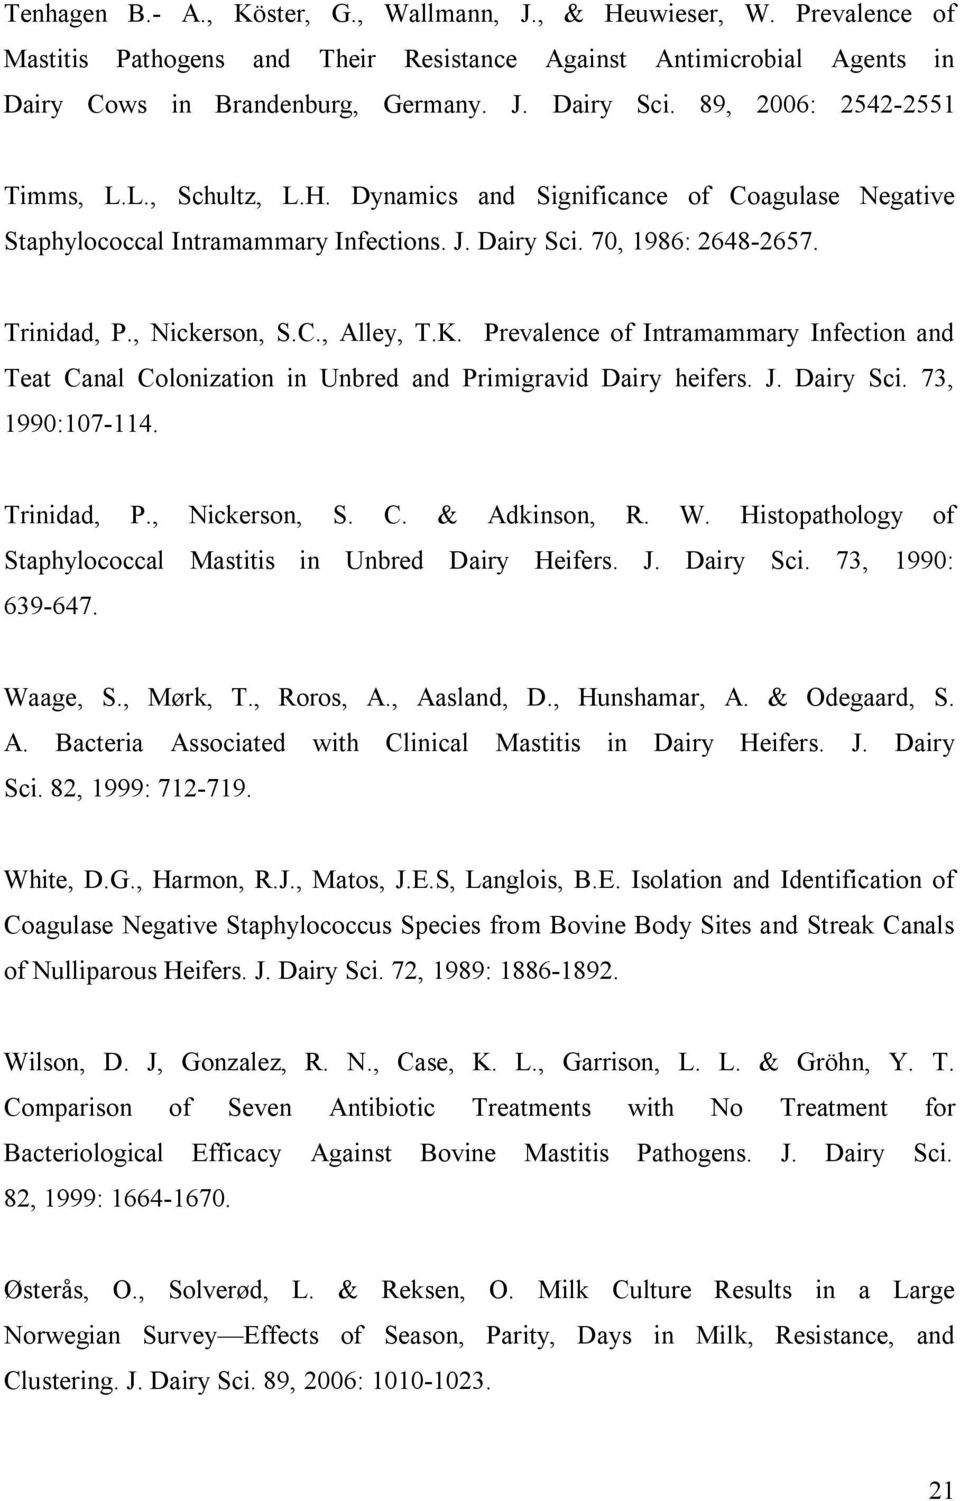 K. Prevalence of Intramammary Infection and Teat Canal Colonization in Unbred and Primigravid Dairy heifers. J. Dairy Sci. 73, 1990:107-114. Trinidad, P., Nickerson, S. C. & Adkinson, R. W.